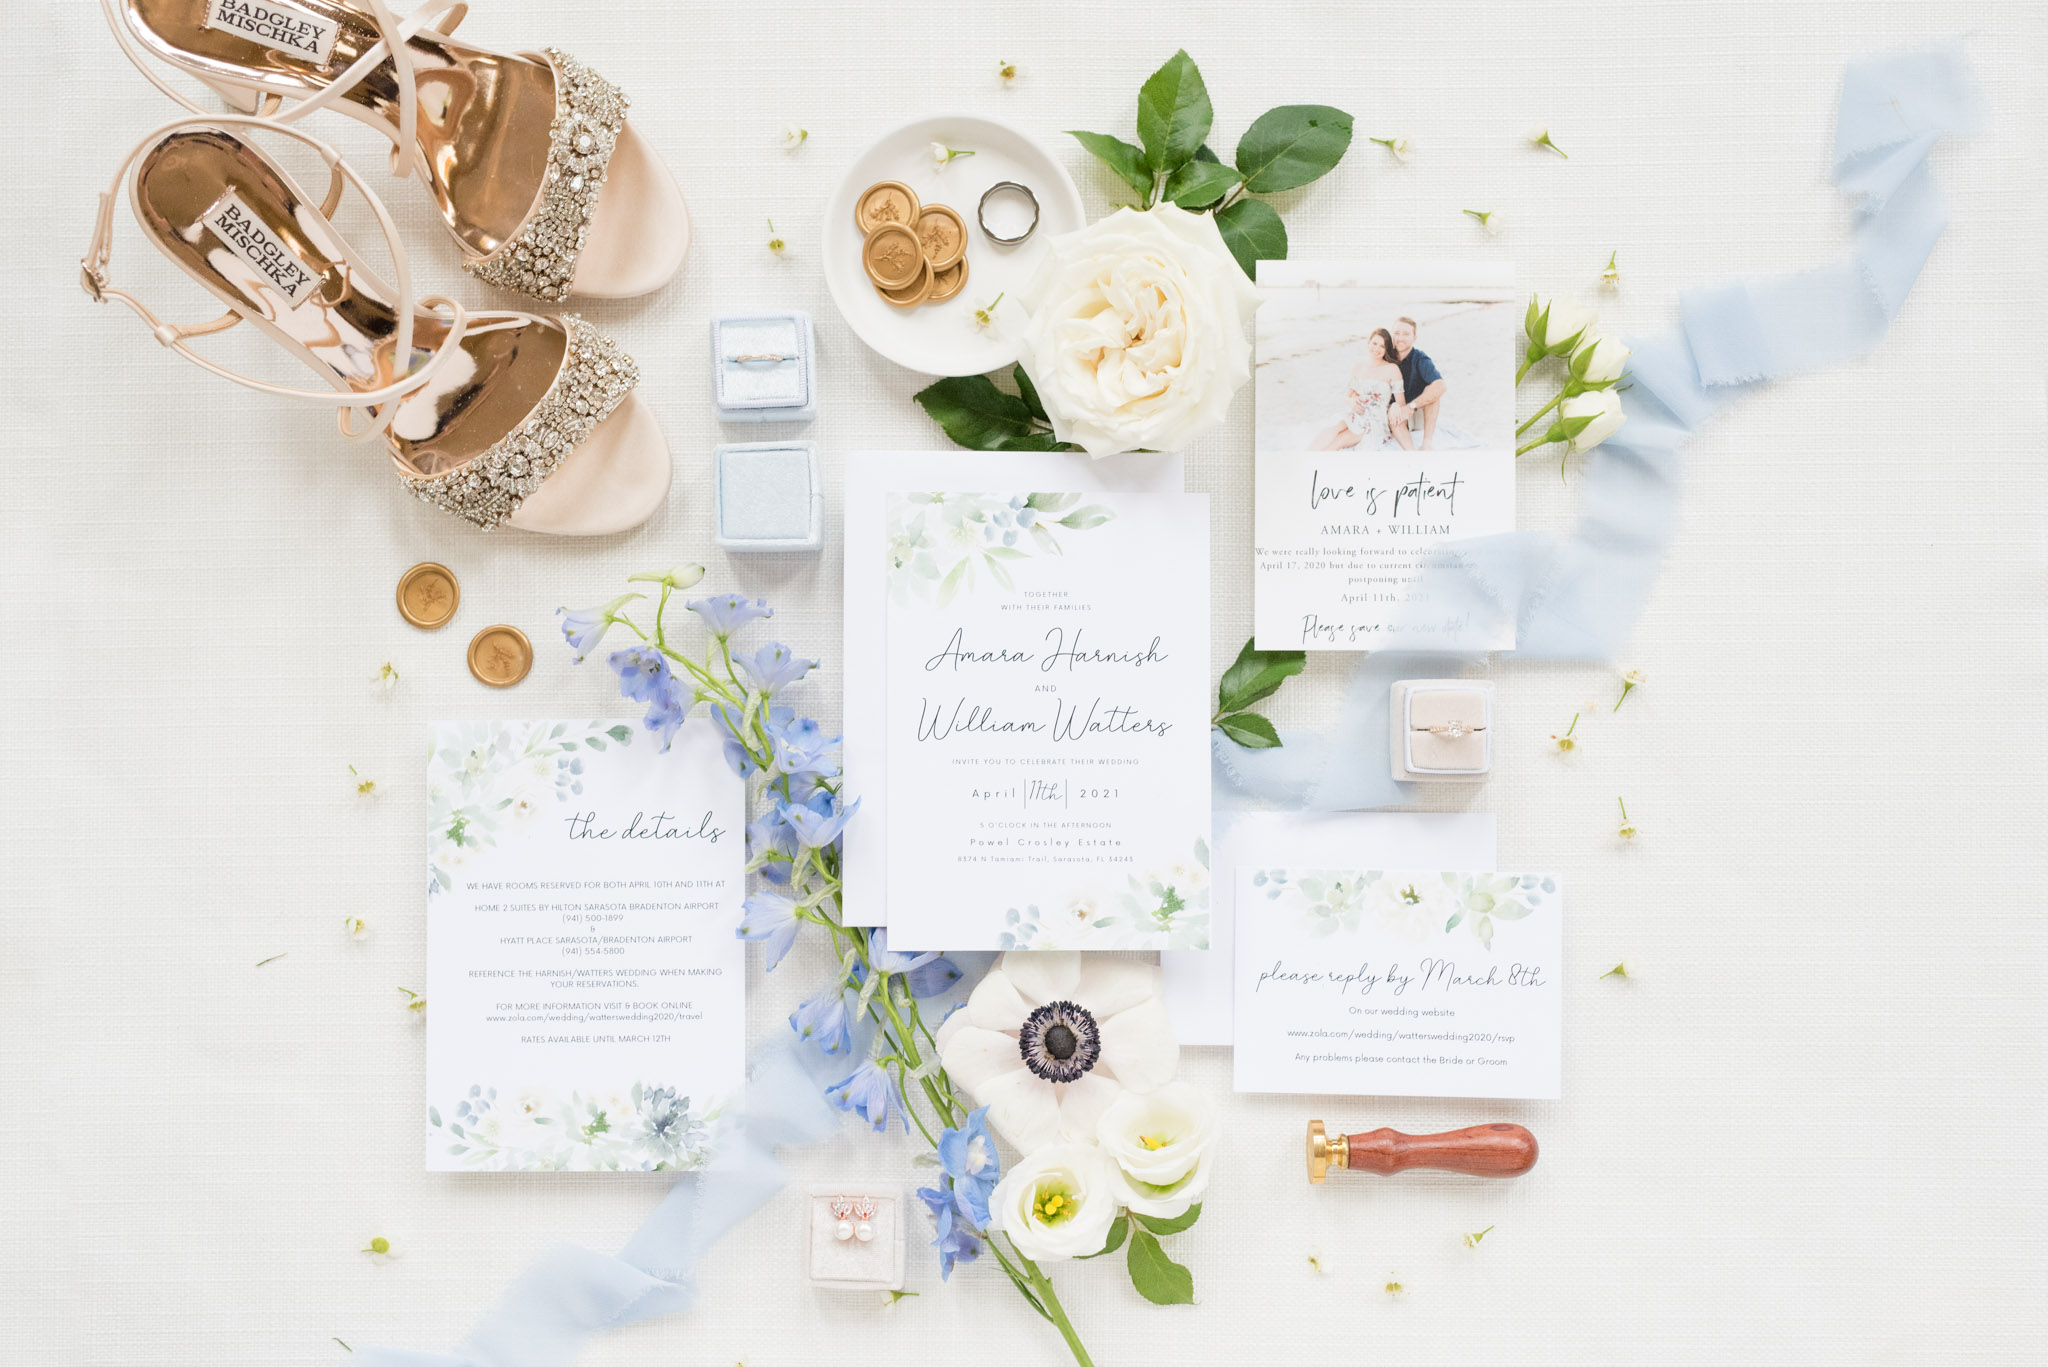 Wedding invitations sit with bride's details.